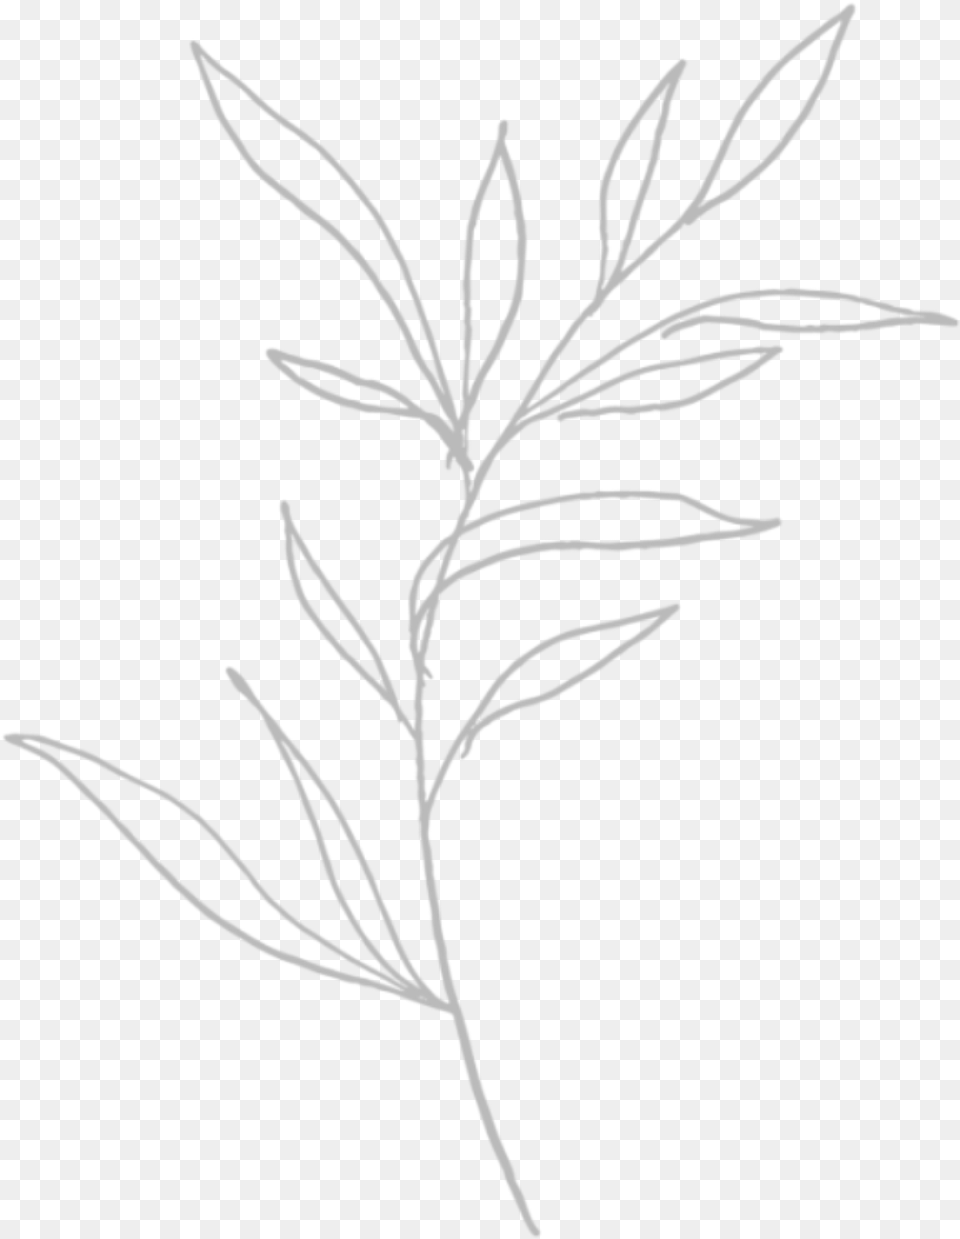 Flower Drawing Sticker Sketch, Stencil, Herbal, Herbs, Plant Png Image